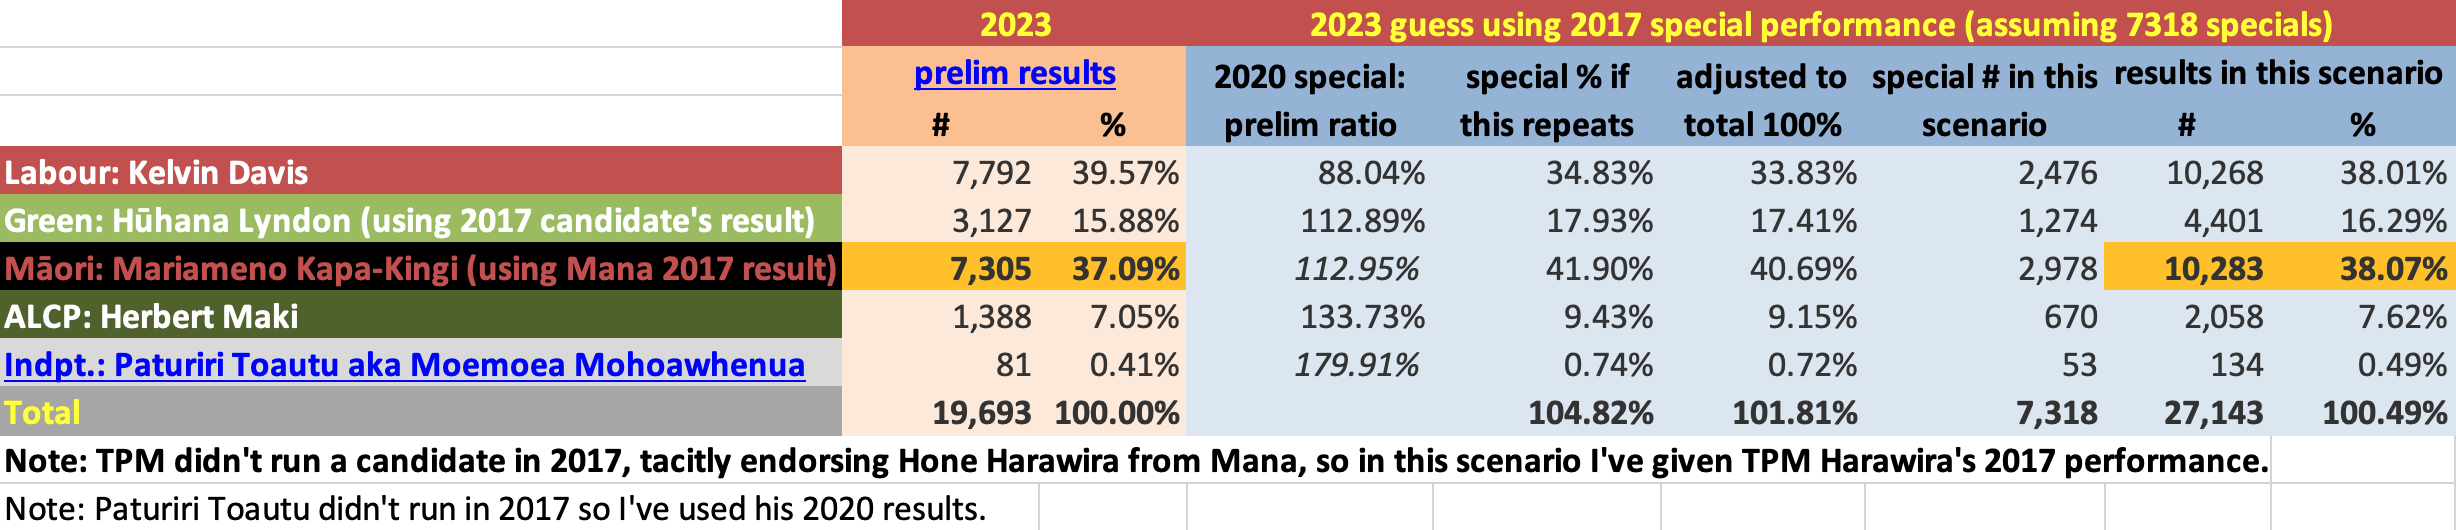 Screenshot from spreadsheet: Table showing Te Tai Tokerau - 2023 guess using 2017 special performance version 2 (using Mana 2017 performance in lieu of a TPM 2017 result)